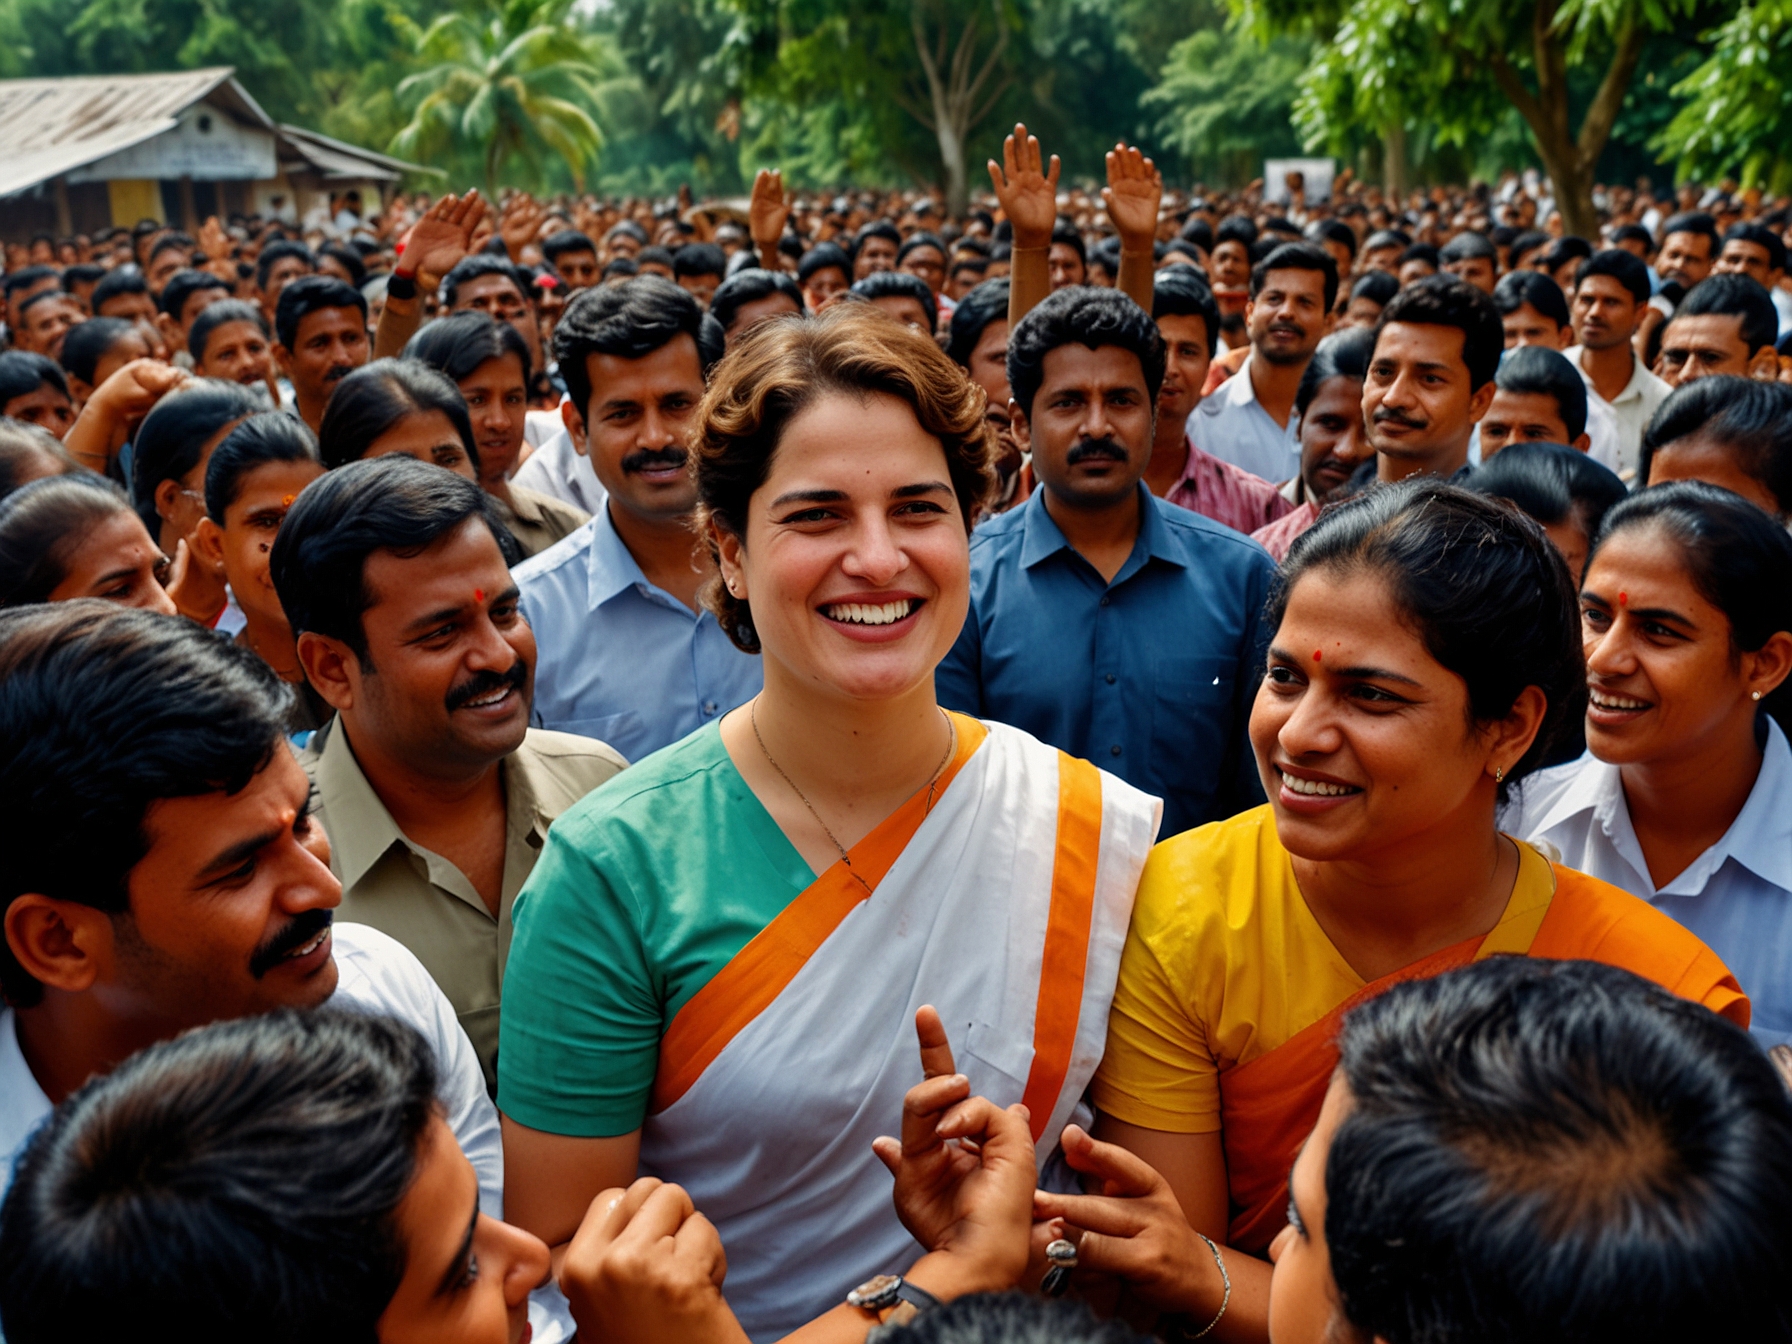 Priyanka Gandhi engaging with a diverse crowd in Wayanad, illustrating her appeal among younger voters and her role in energizing the Congress’s campaign in southern India.